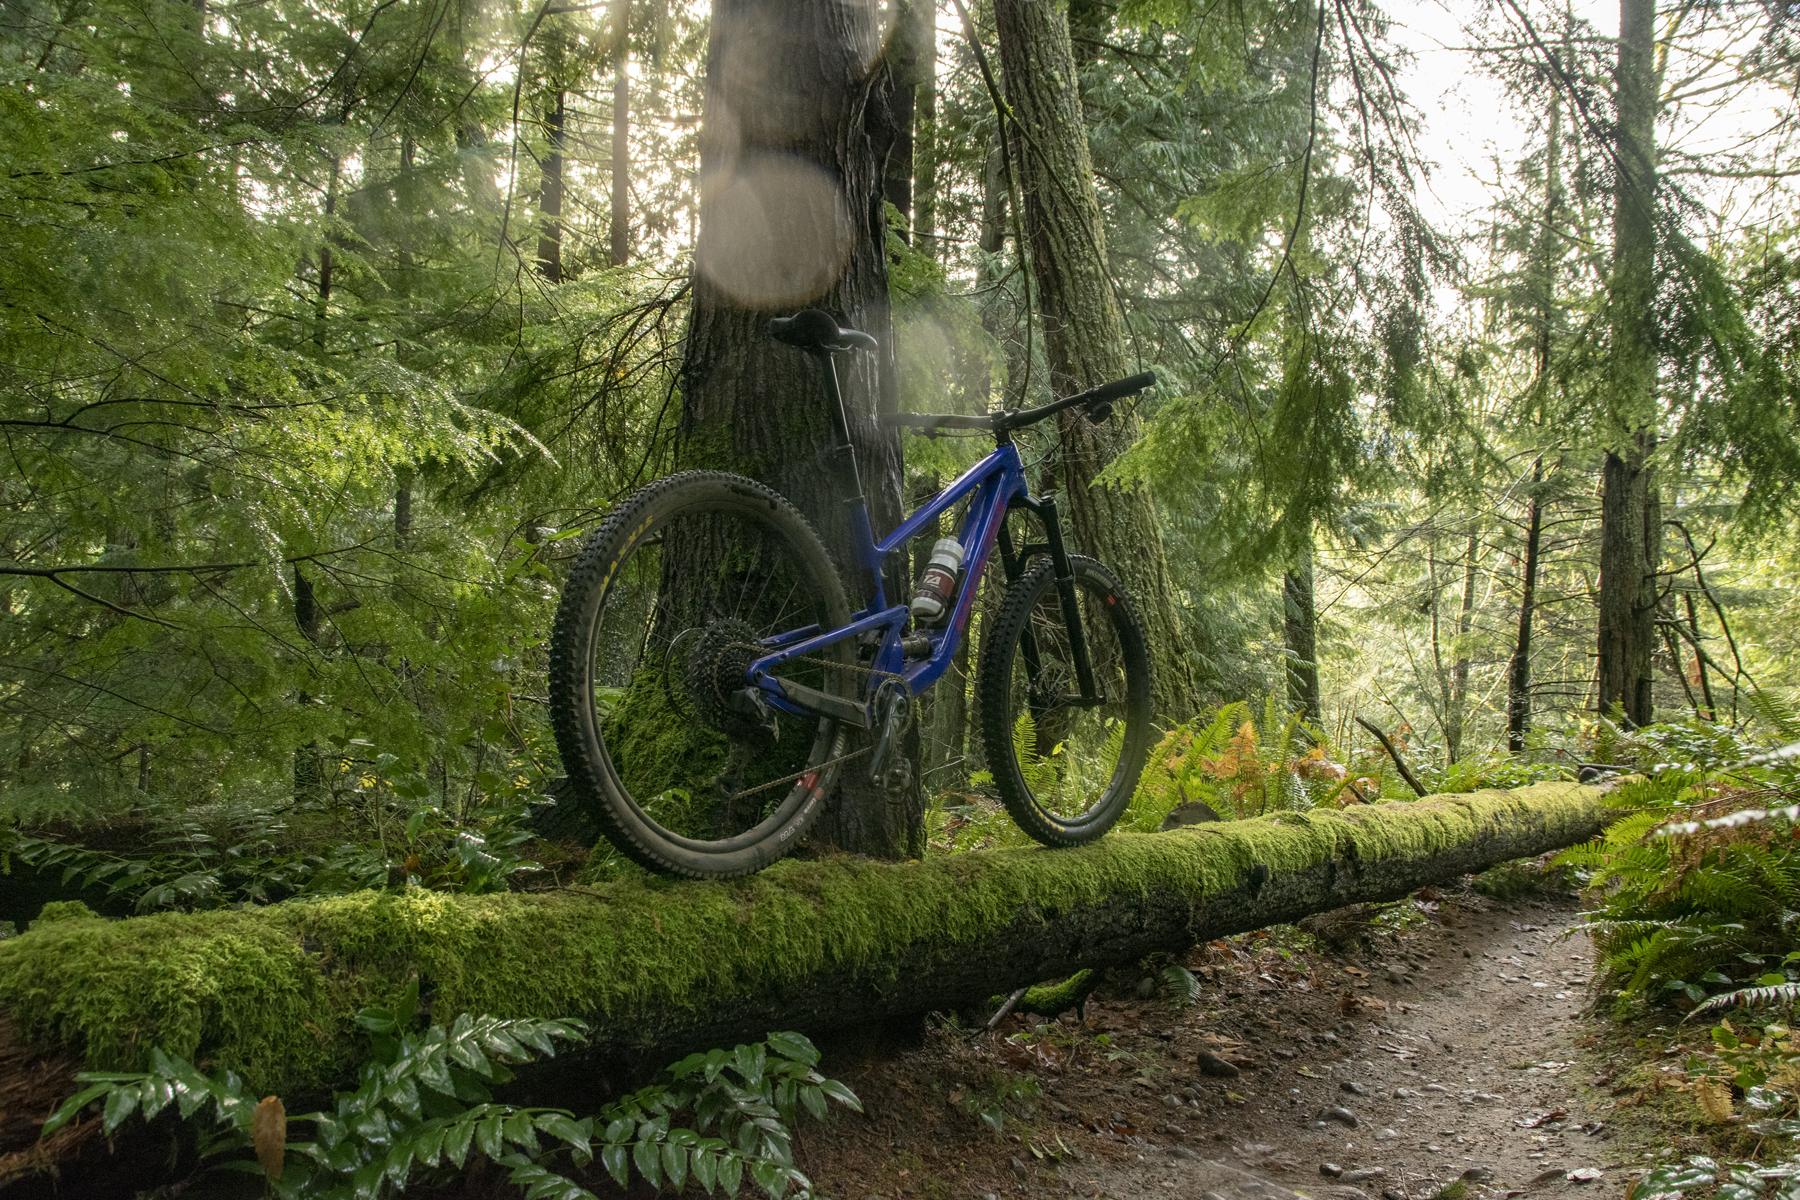 New Santa Cruz Nomad CC X01 AXS RSV 2023 first ride review - Is this the  end of freeriding?